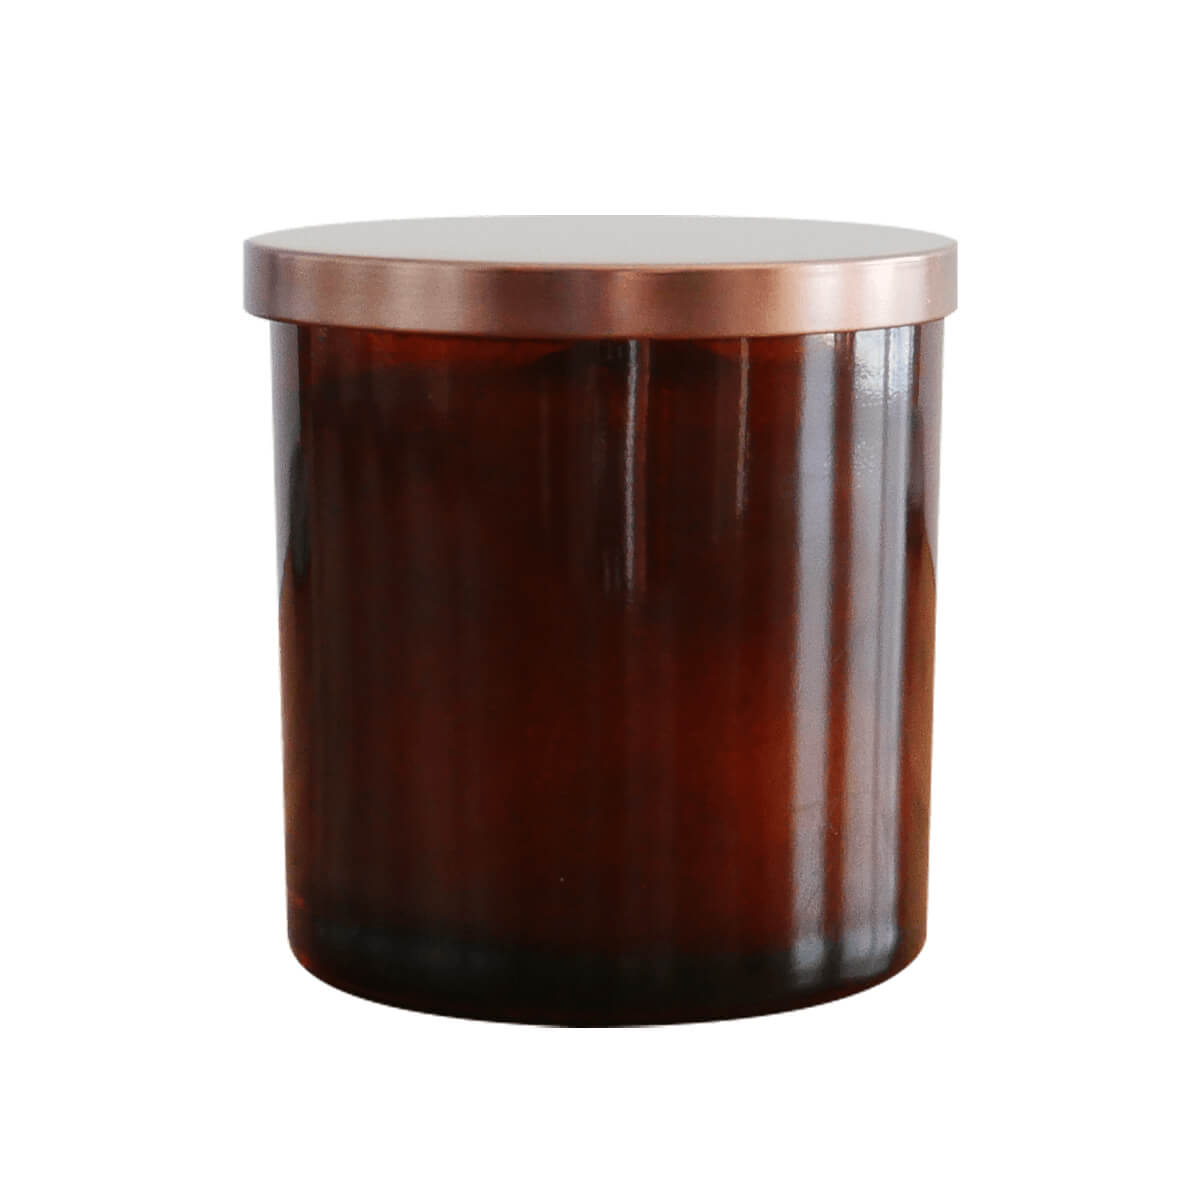 An Amber Glass Tumbler Photo Candle with a copper lid.